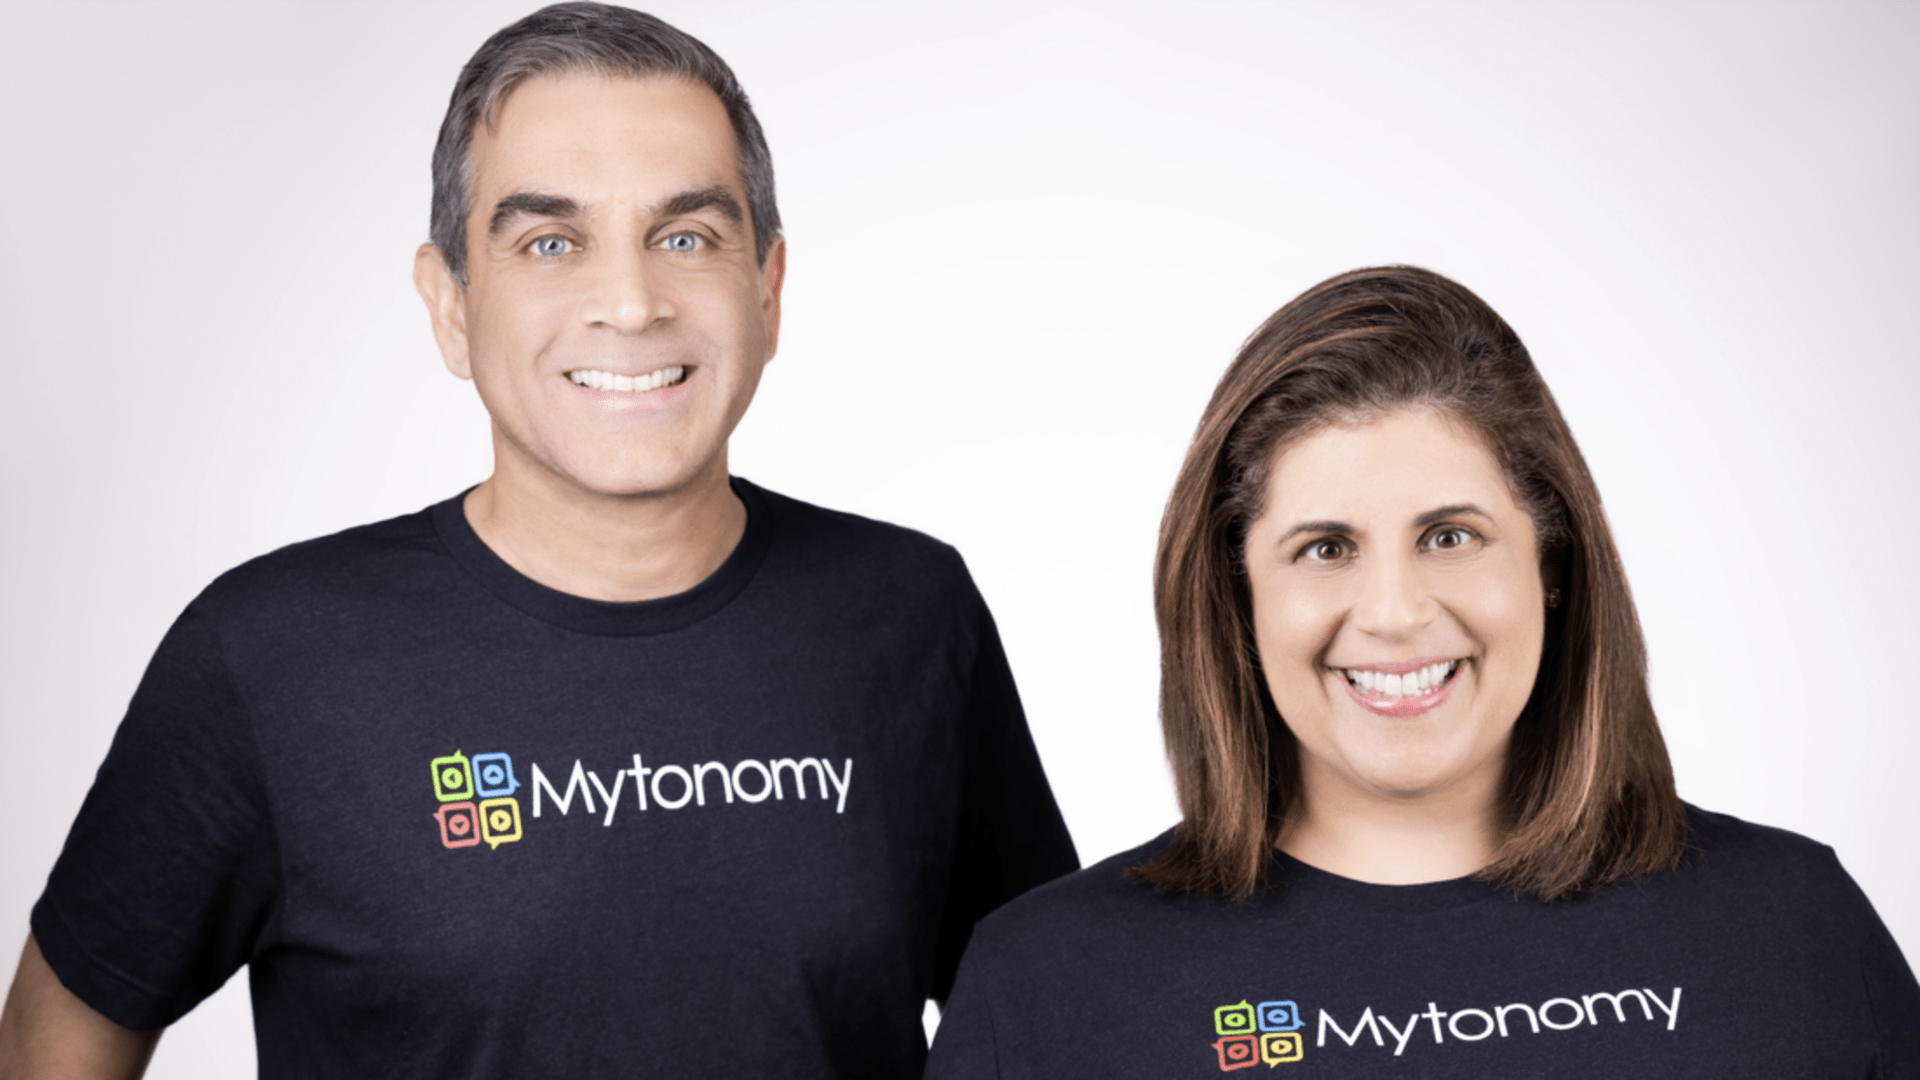 Mytonomy co-founders Anjali Kataria, CEO, and Vinay Bhargava, president, bring Silicon Valley experience to transform health care information delivery